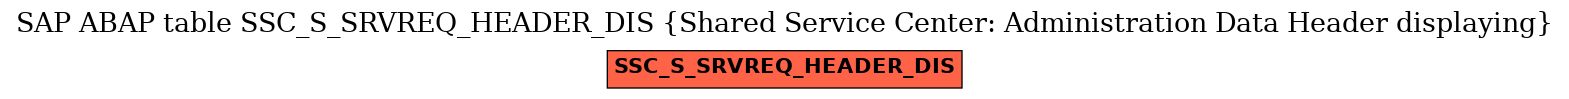 E-R Diagram for table SSC_S_SRVREQ_HEADER_DIS (Shared Service Center: Administration Data Header displaying)